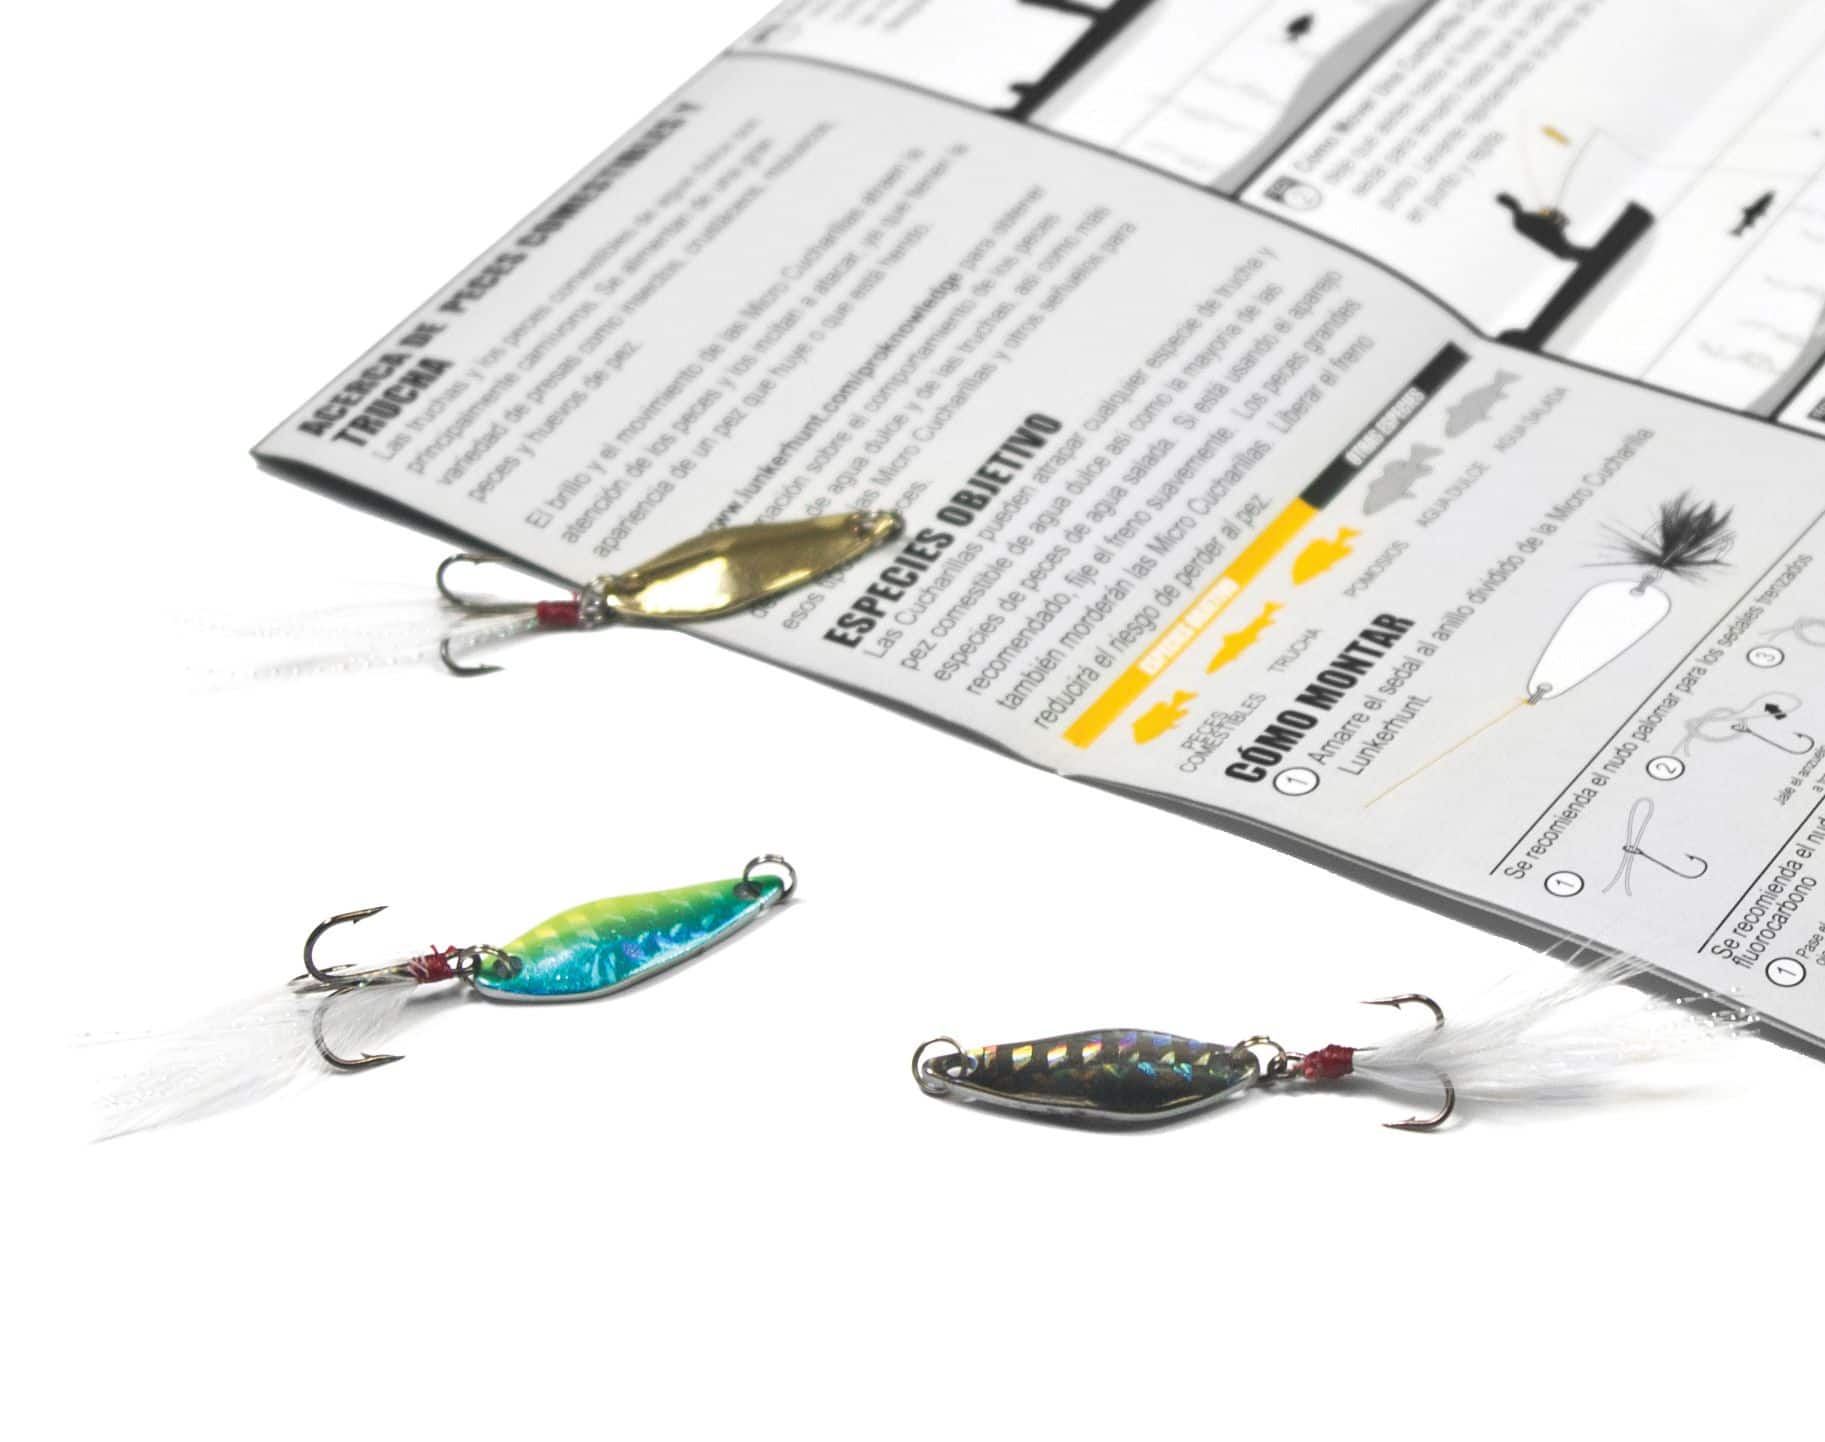 https://media-www.canadiantire.ca/product/playing/fishing/fishing-lures/0771159/ek123-micro-spoon-trout-panfish-edu-kit-ef25bed2-fdcd-4f55-85c8-346071d7a52d-jpgrendition.jpg